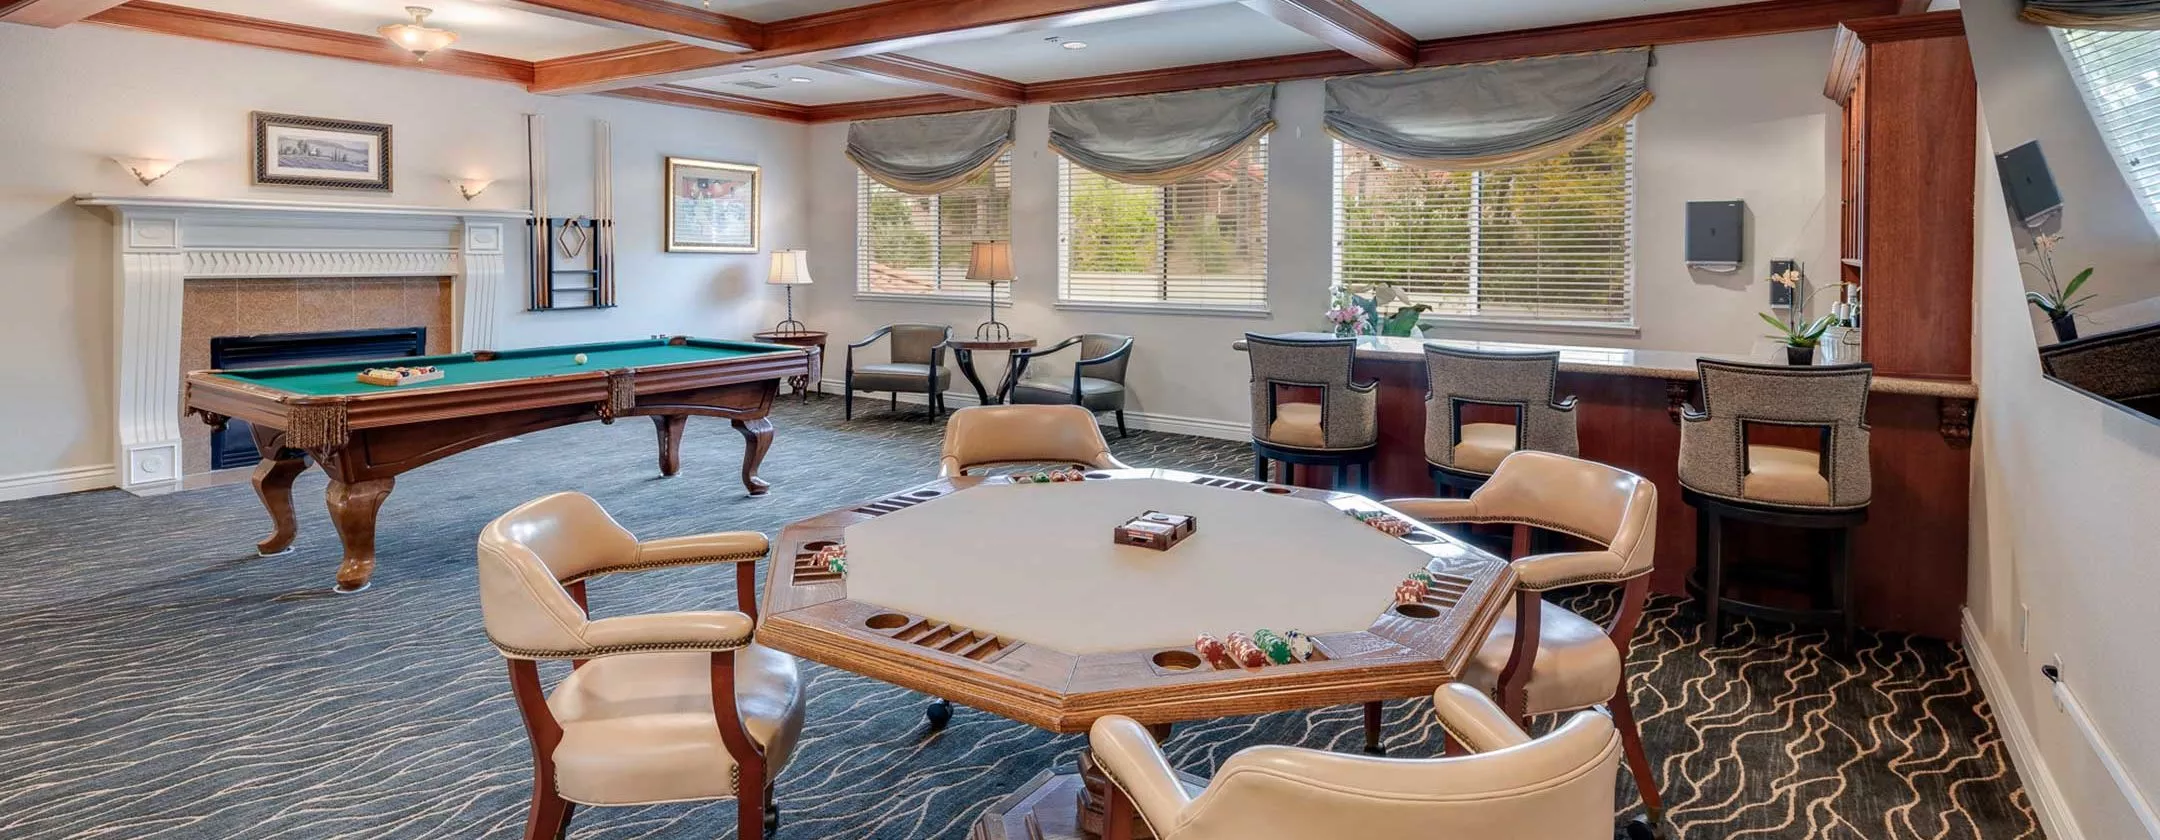 Chino Hills entertainment room with game table